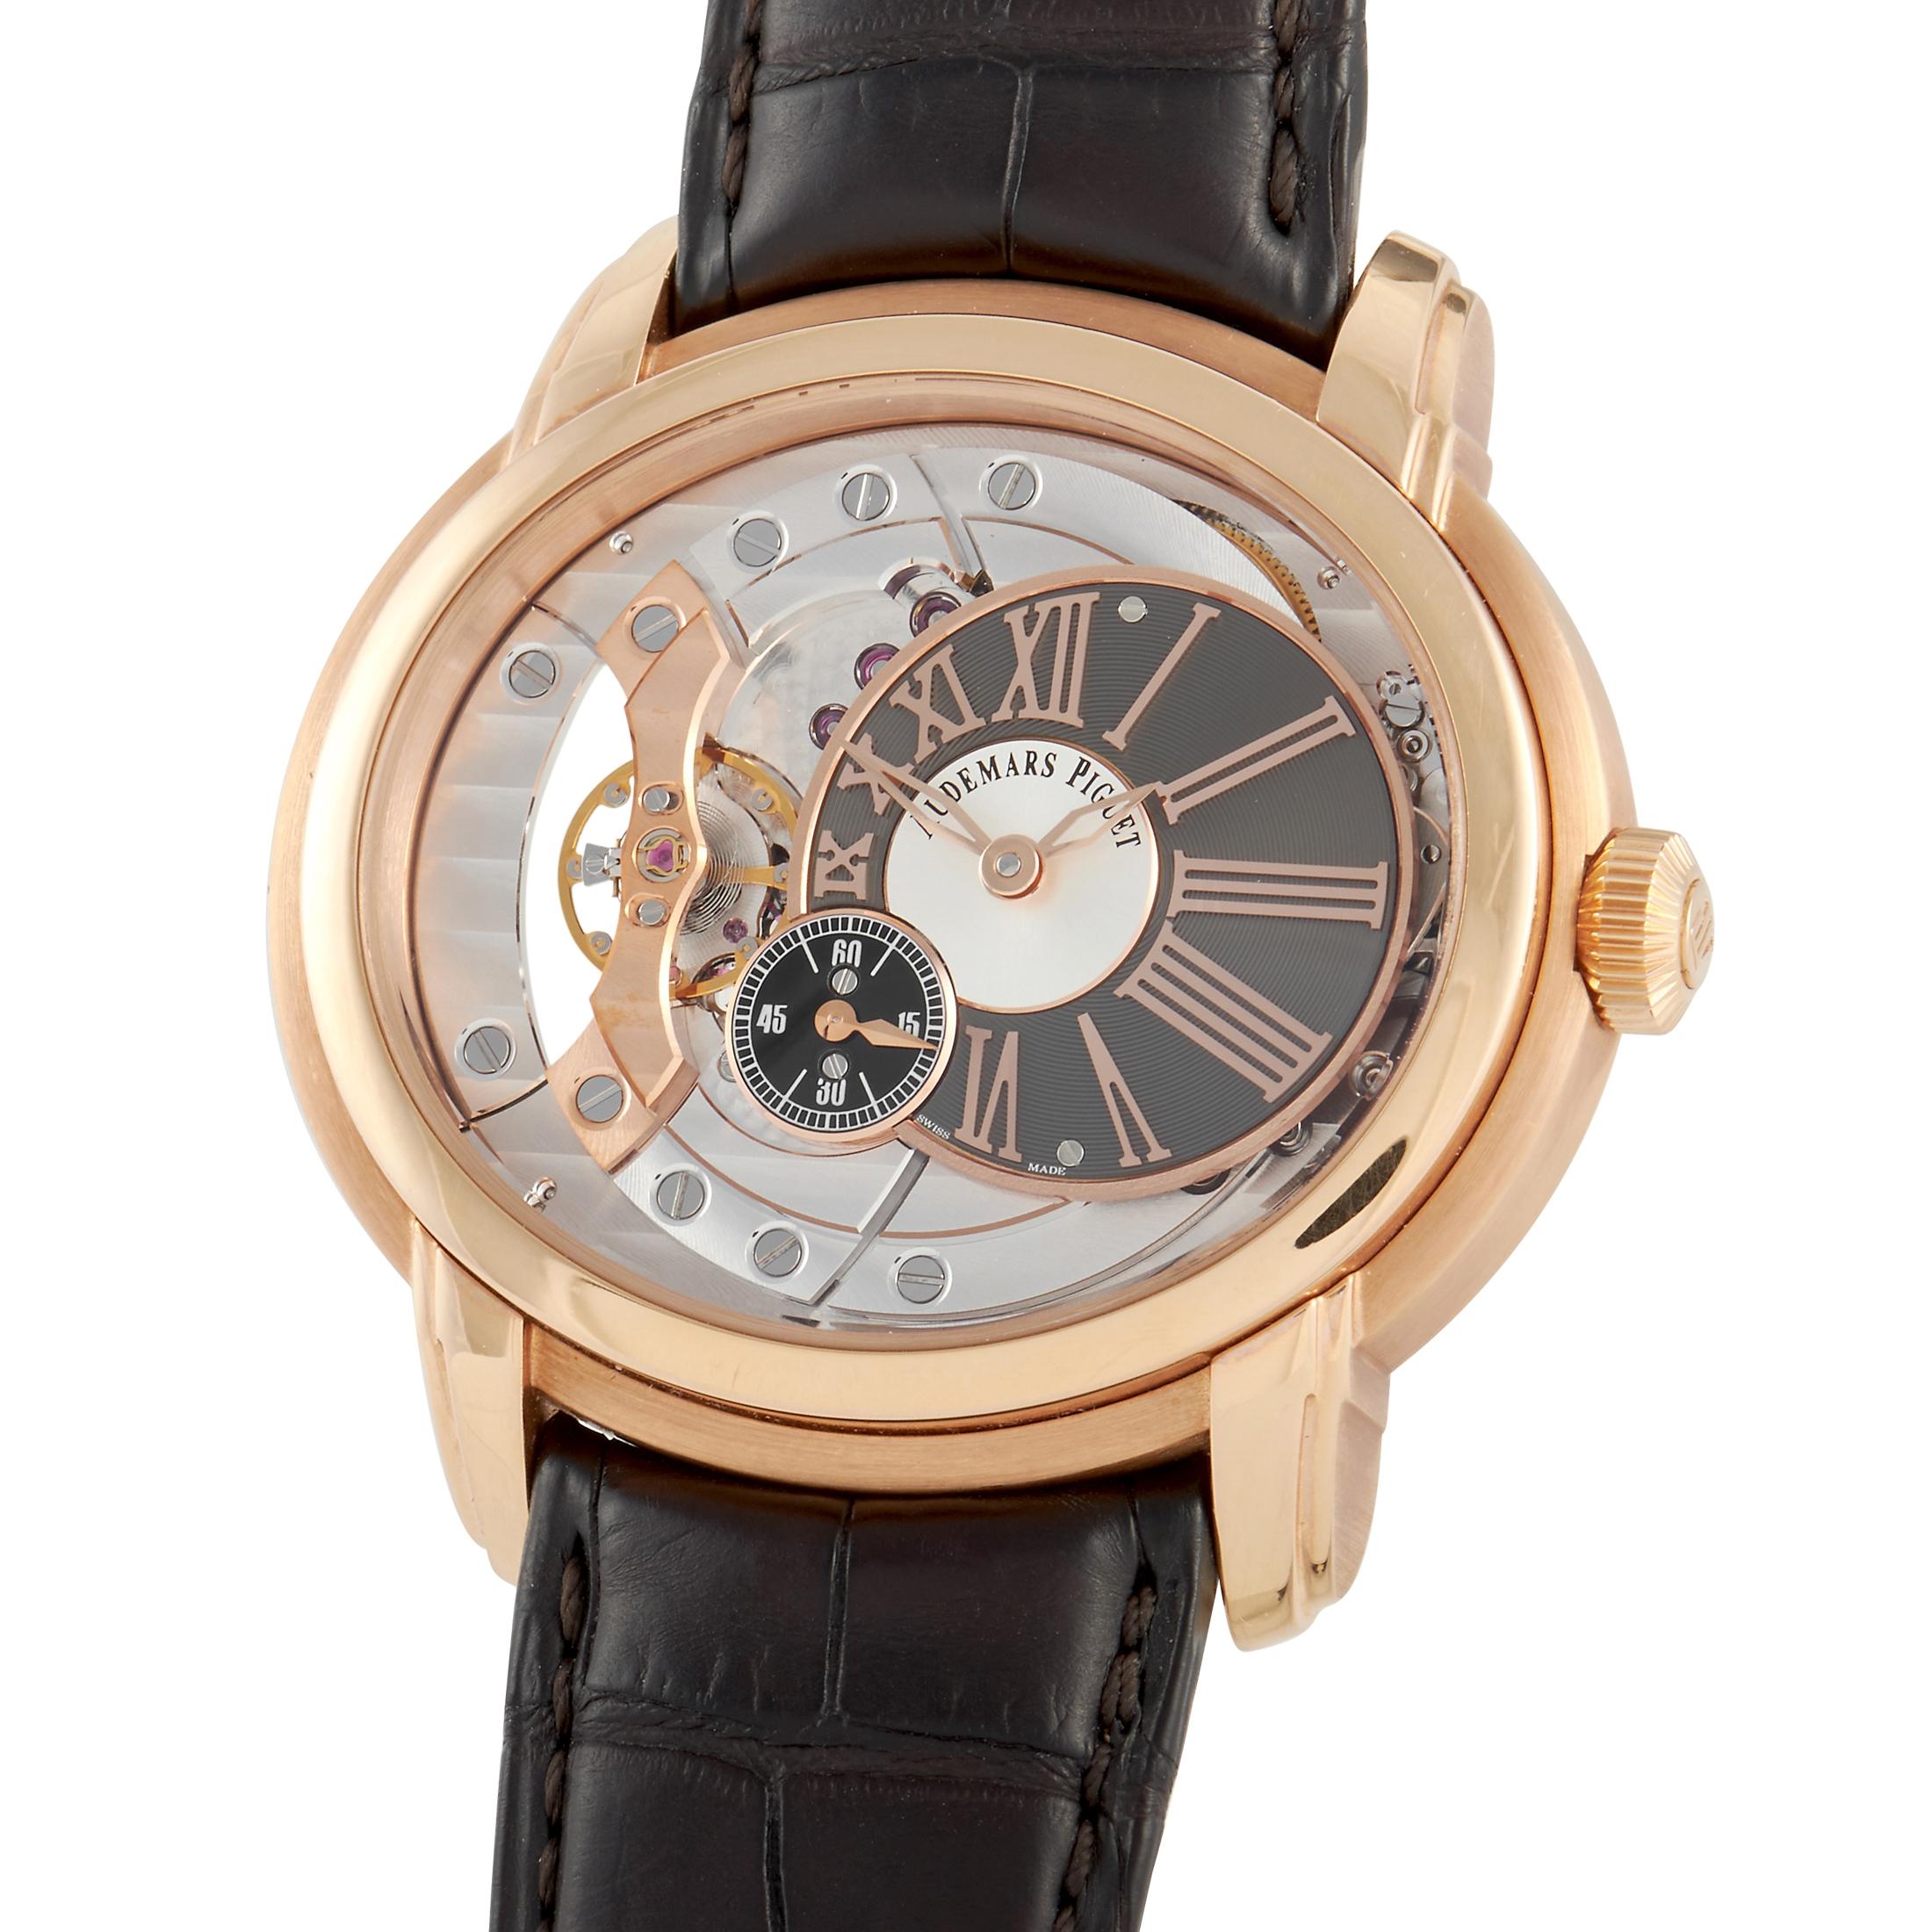 The Audemars Piguet Millenary Watch, reference number 15350 OR.00.D093CR.01, is a surprising timepiece that defies convention in the best way possible. 

A creative interpretation of a modern timepiece, this impeccably crafted watch features an oval